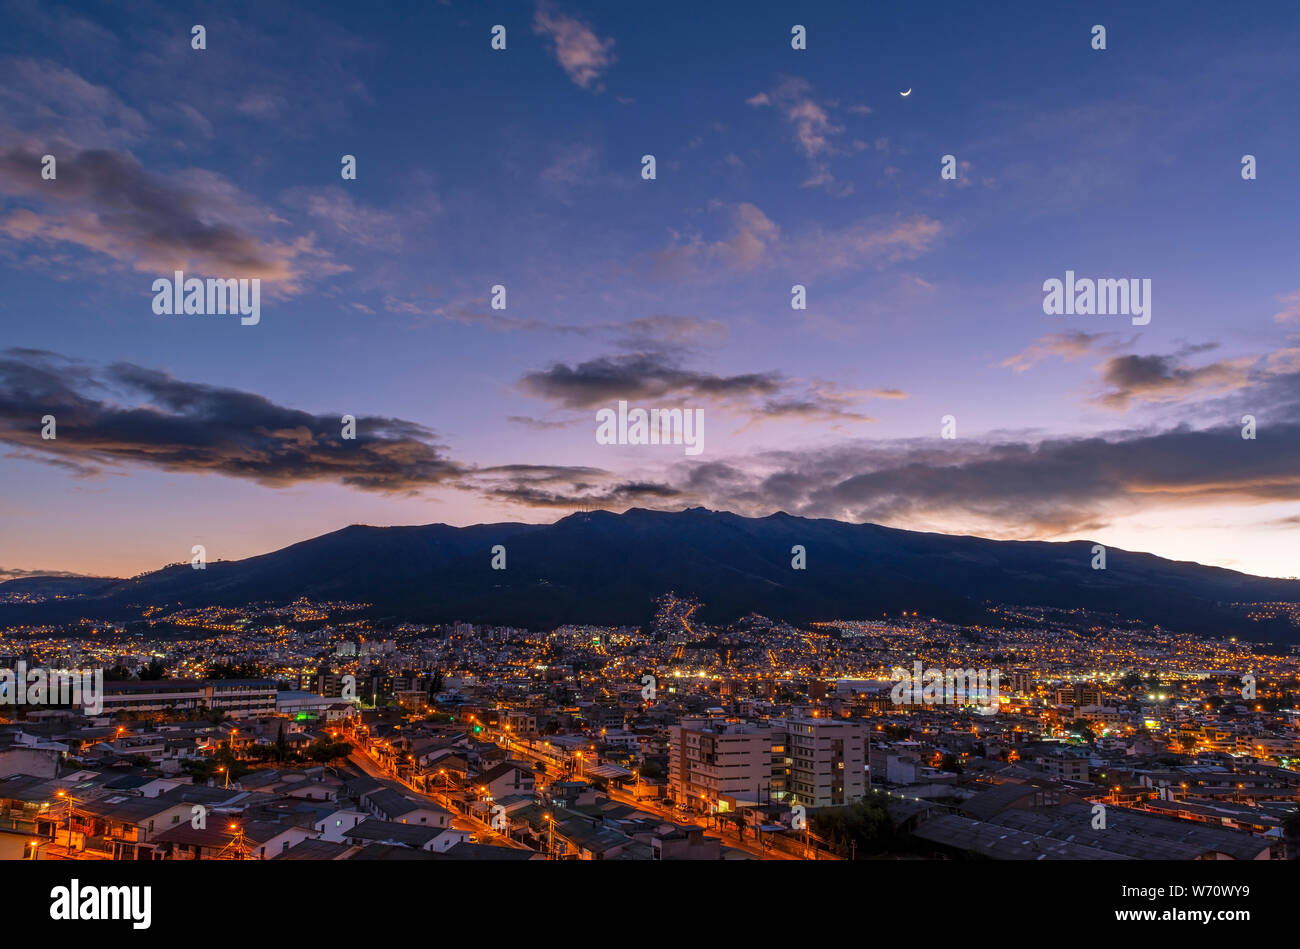 Cityscape of Quito city at sunset with the mighty peaks of the Pichincha volcano and crescant moon, Andes mountains, Ecuador. Stock Photo